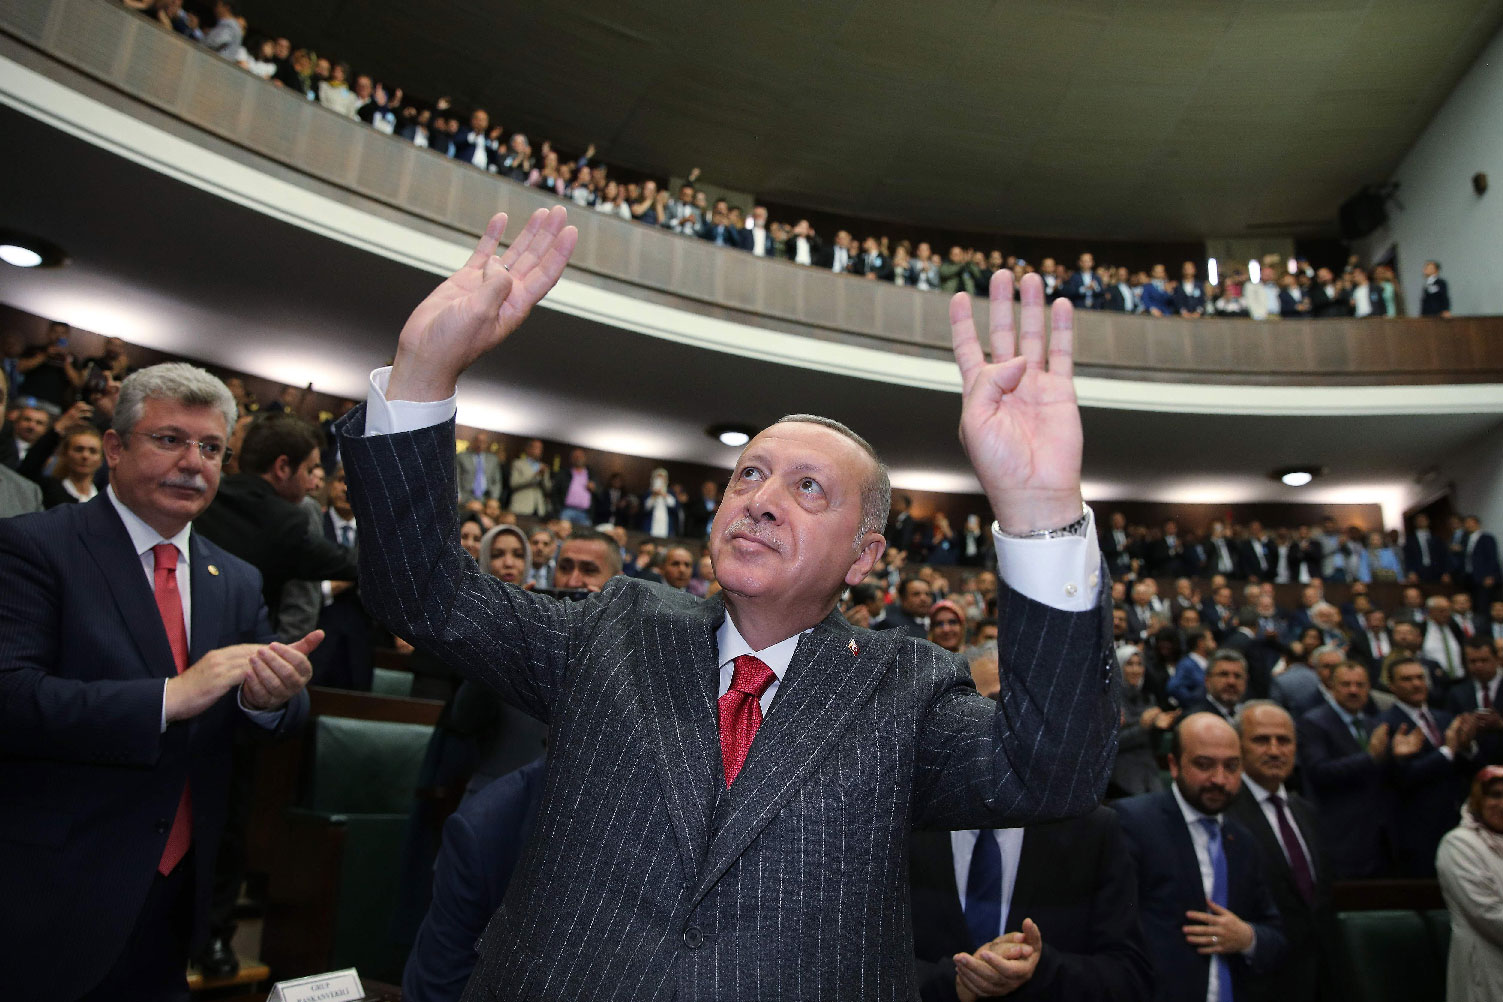 Turkish President Recep Tayyip Erdogan (C) gesturing in front of members of ruling Justice and Development Party (AKP)